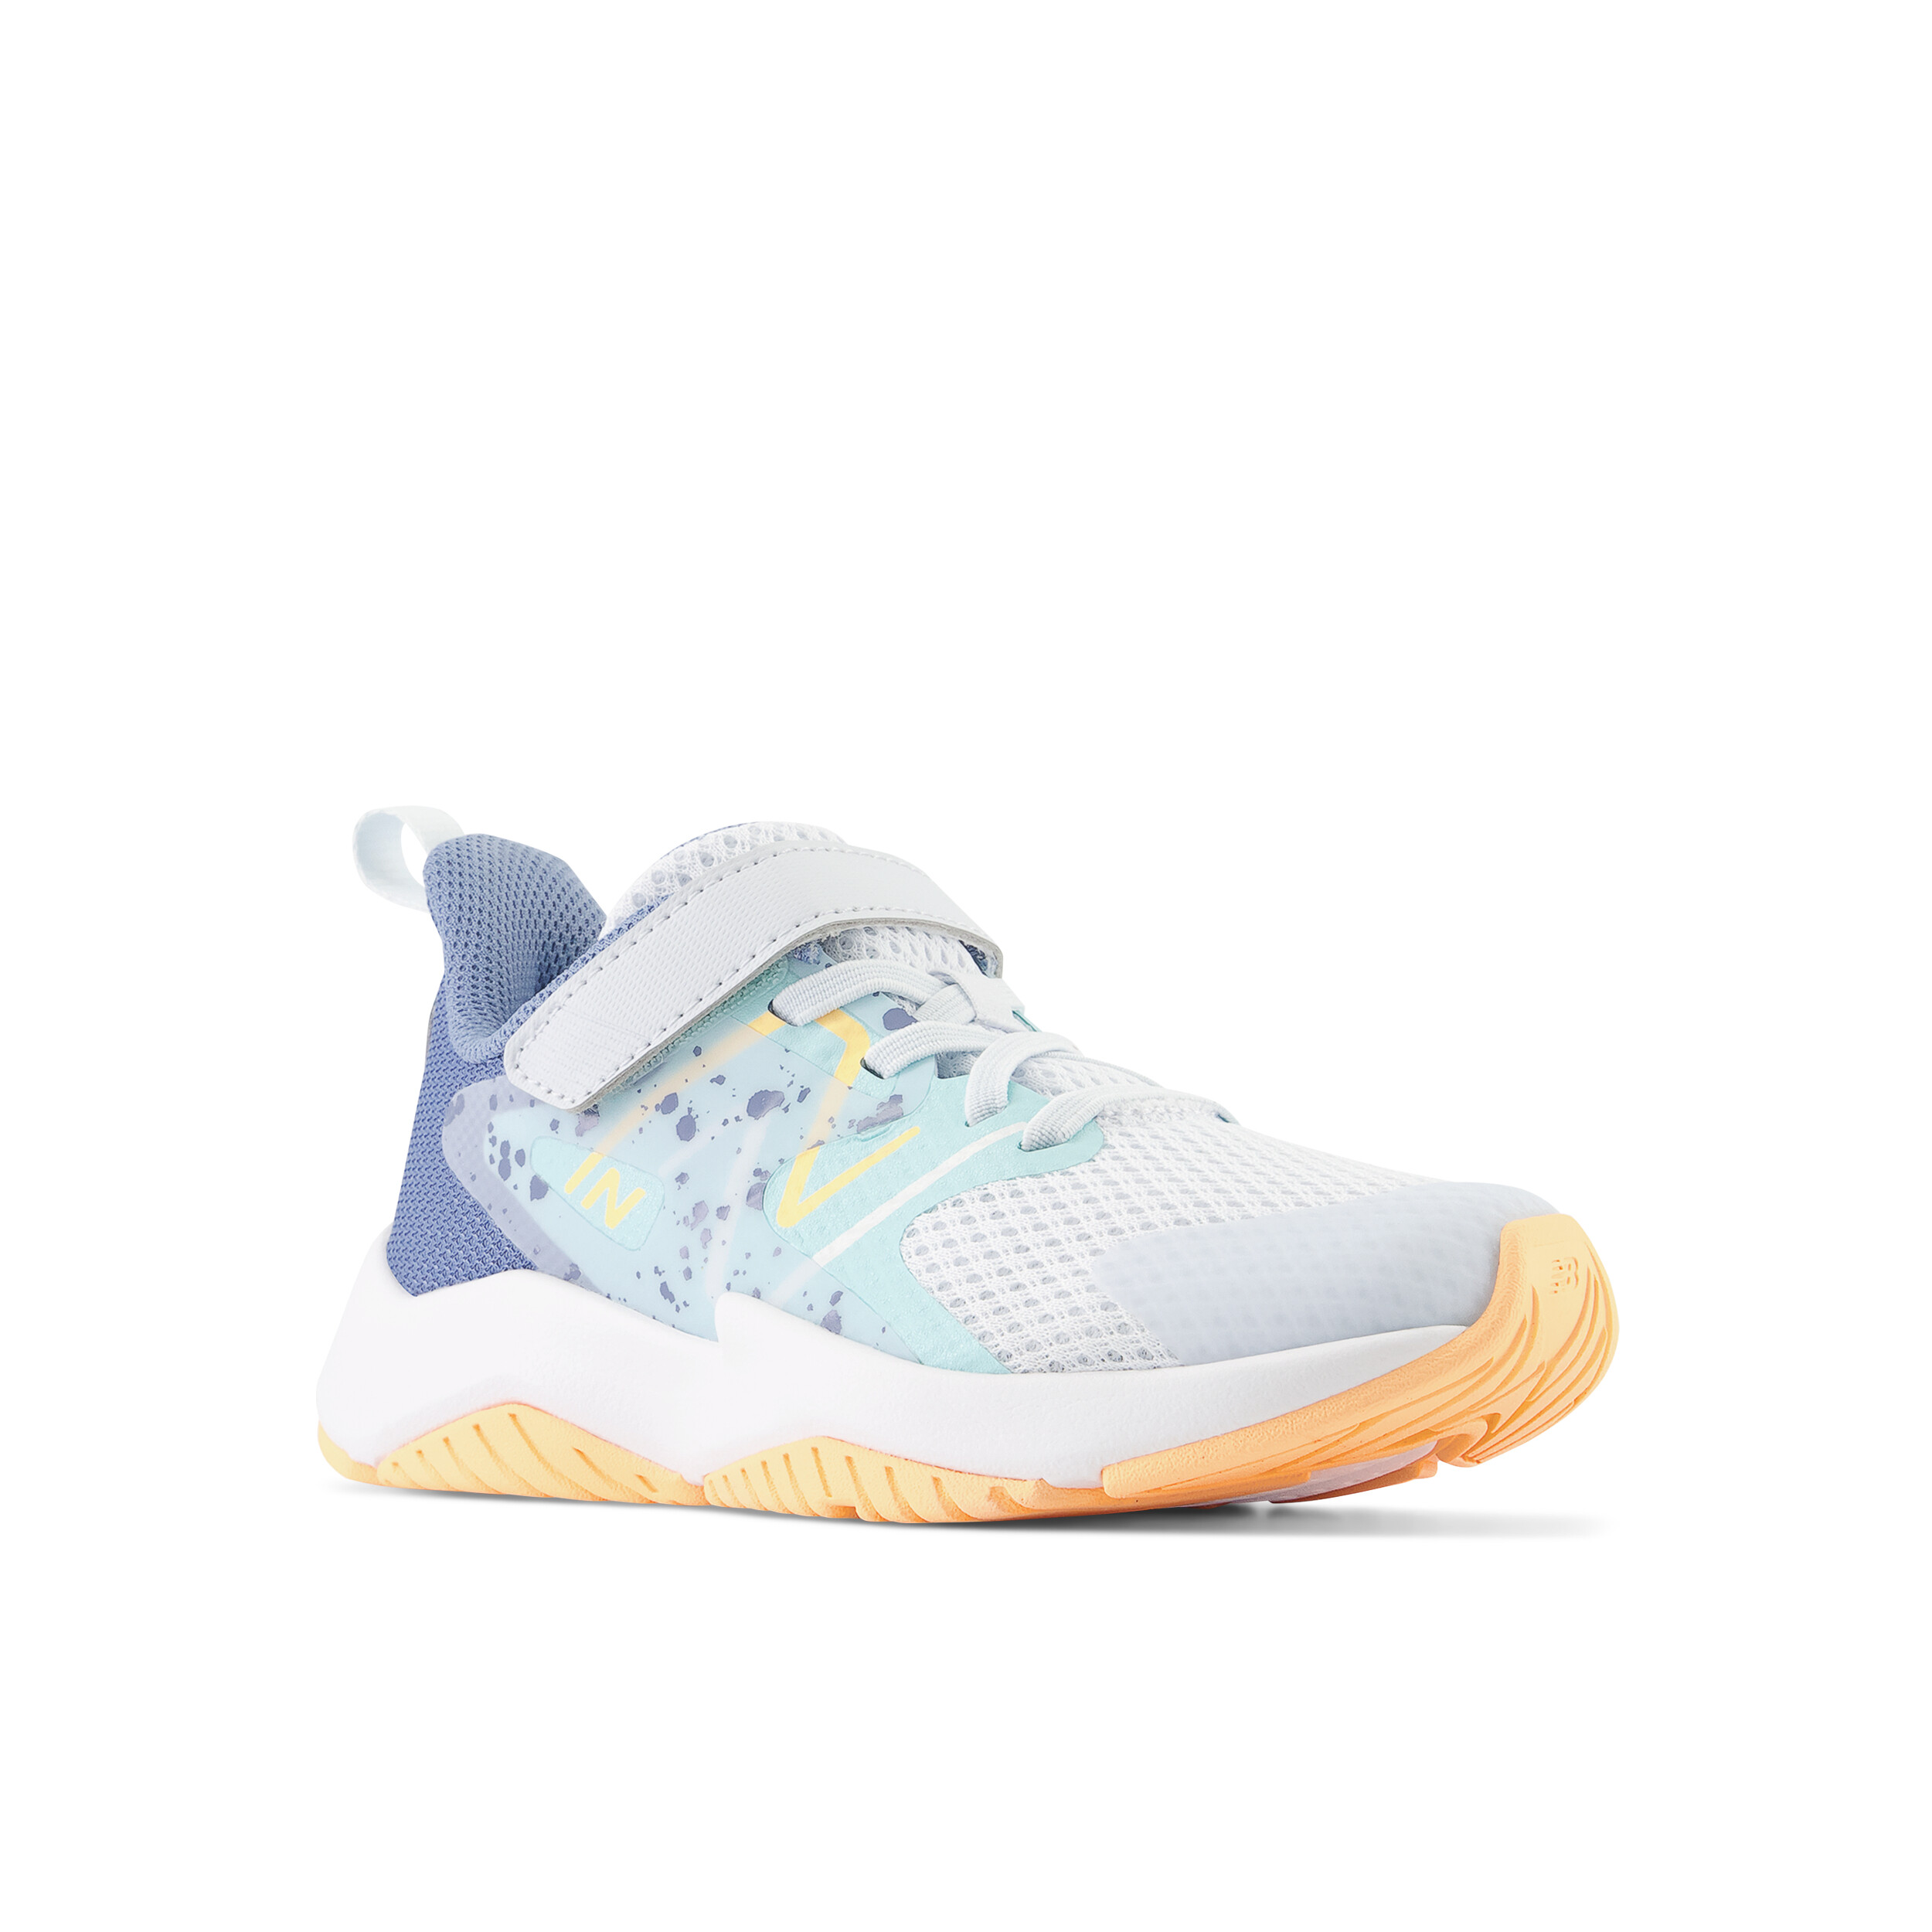 Incaltaminte Fete New Balance Kids Rave Run v2 Bungee Lace with Hook-and-Loop Top Strap (Little KidBig Kid) Ice BlueBright Cyan